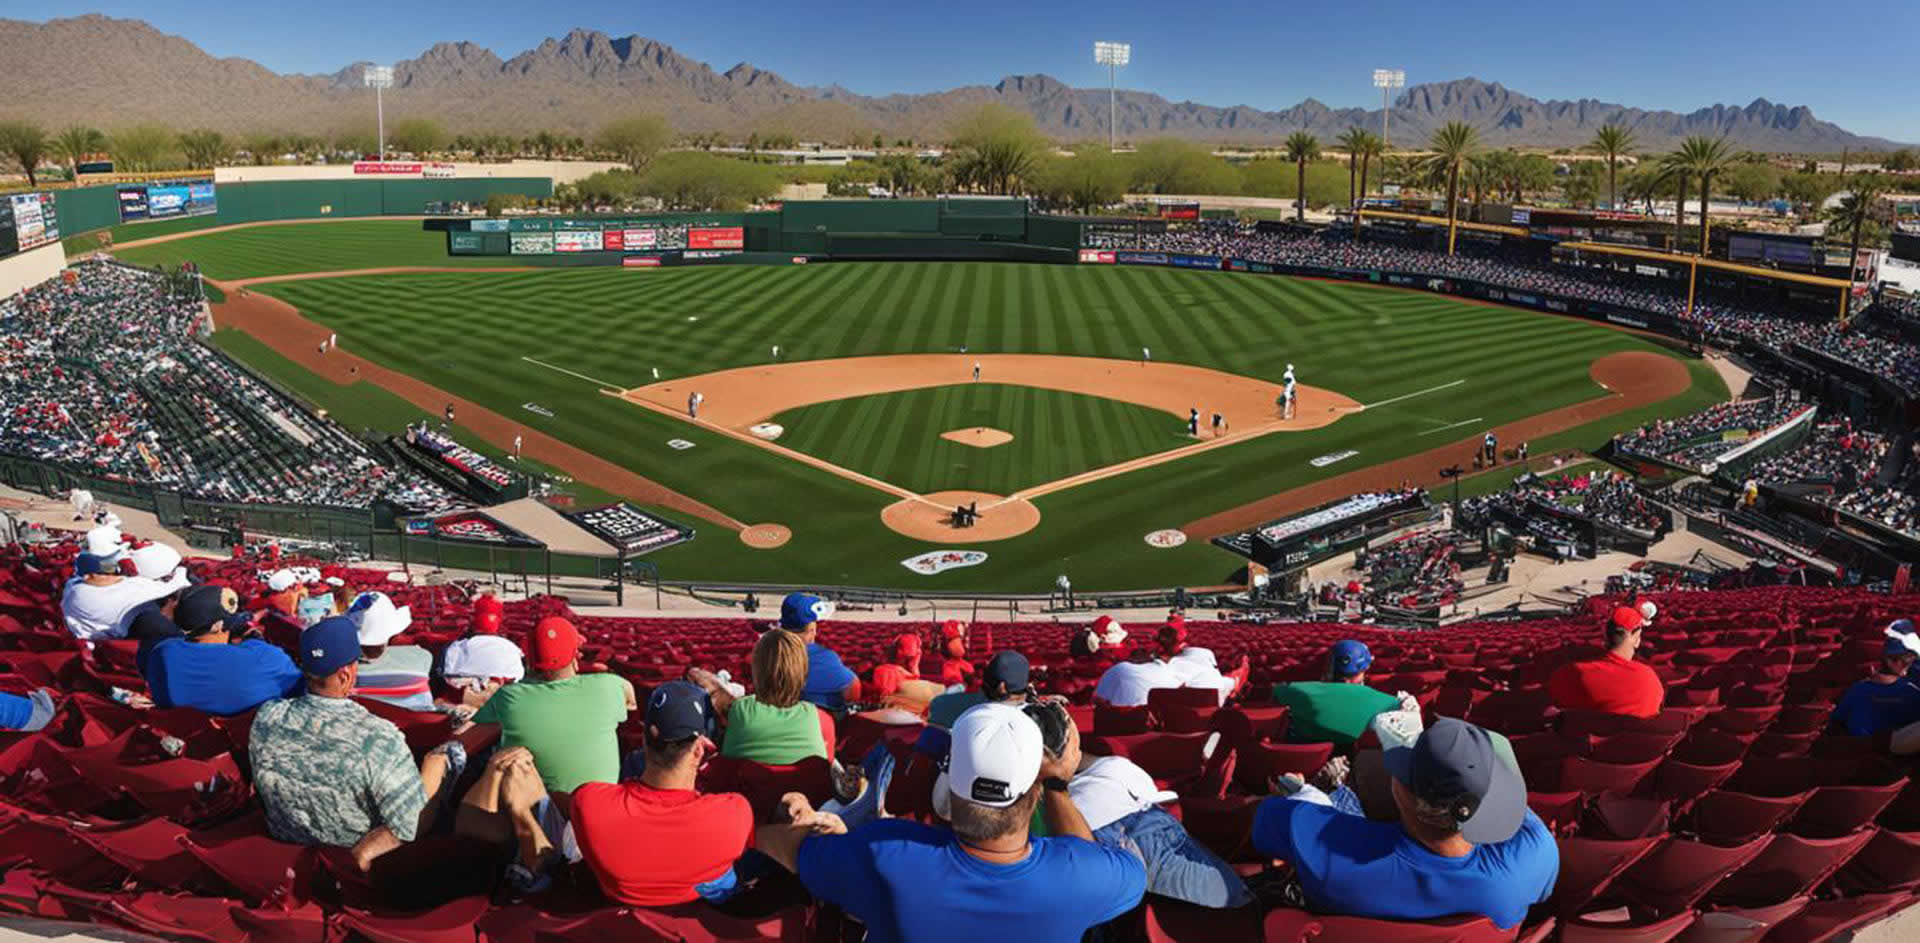 Cactus League Seating Options